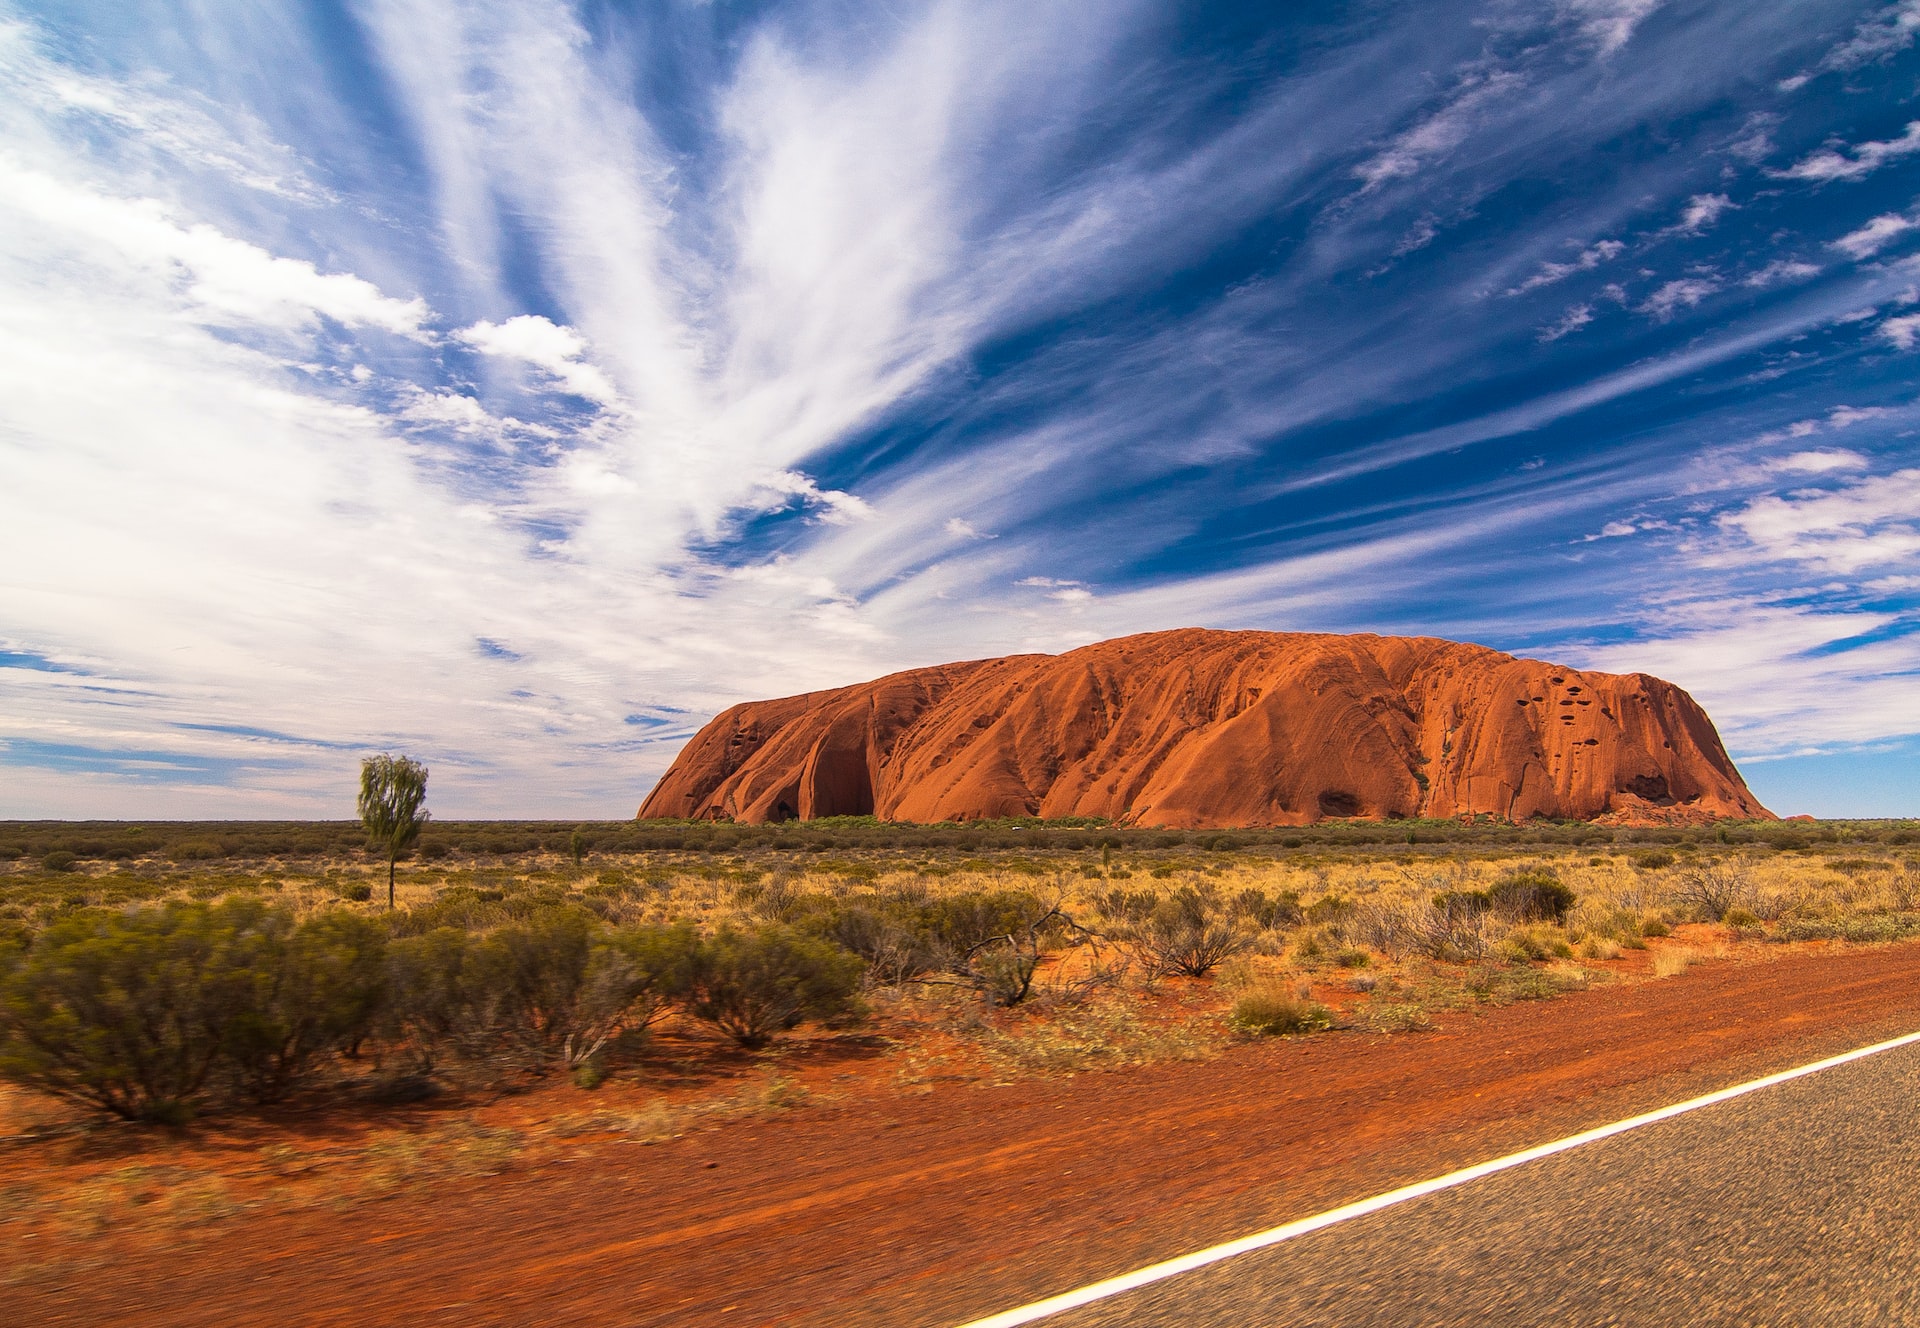 The red sand of Uluru under a blue sky with some clouds in Australia.